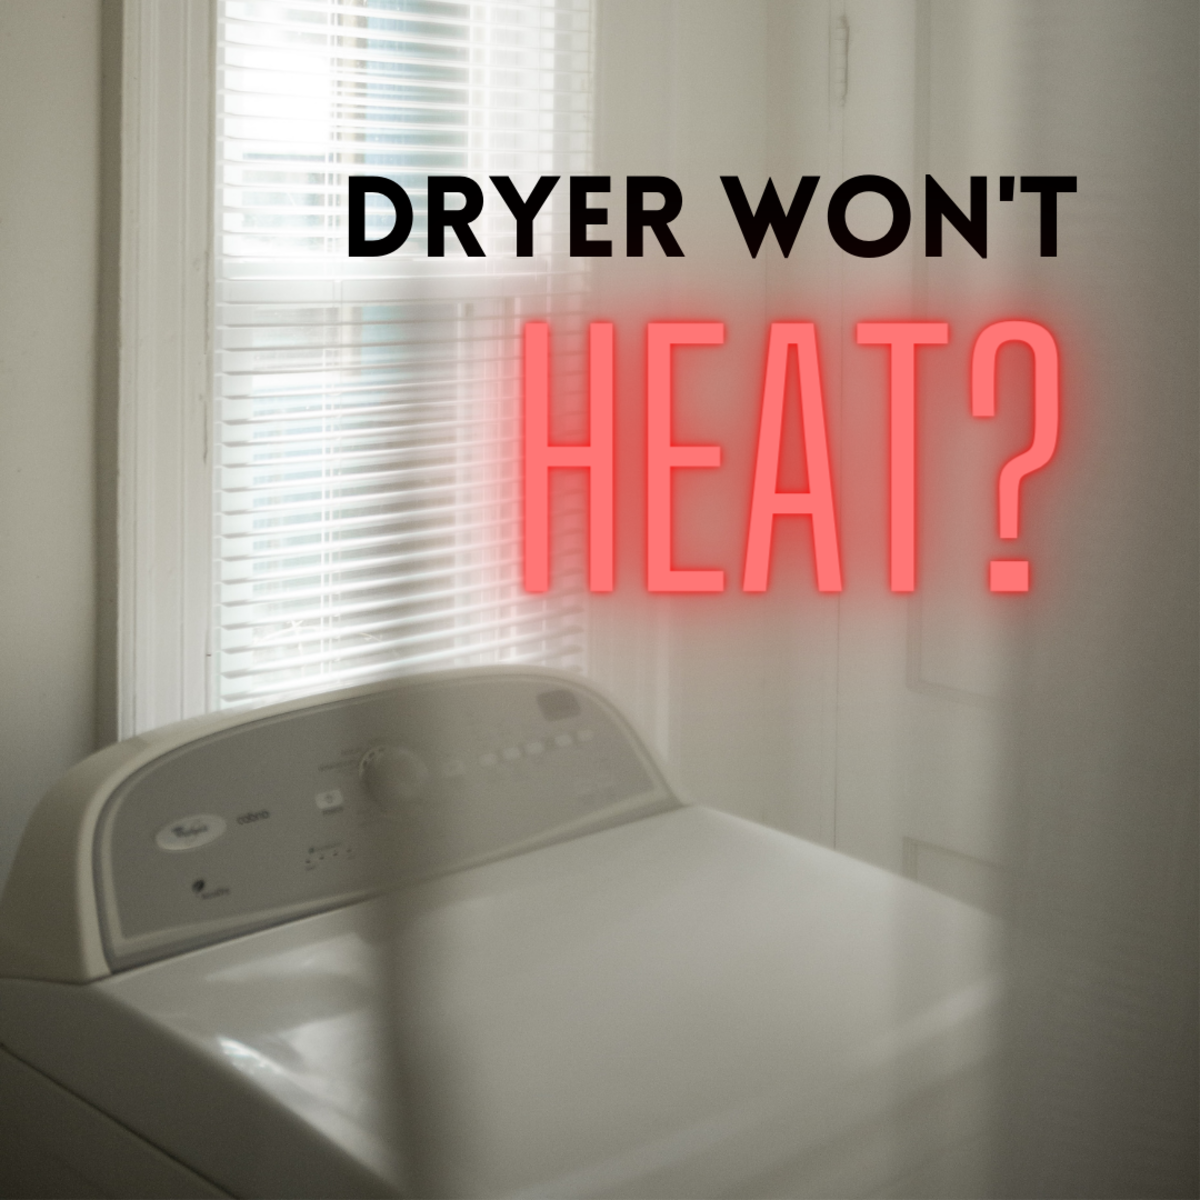 Why Is My Dryer Not Heating? Troubleshooting Guide